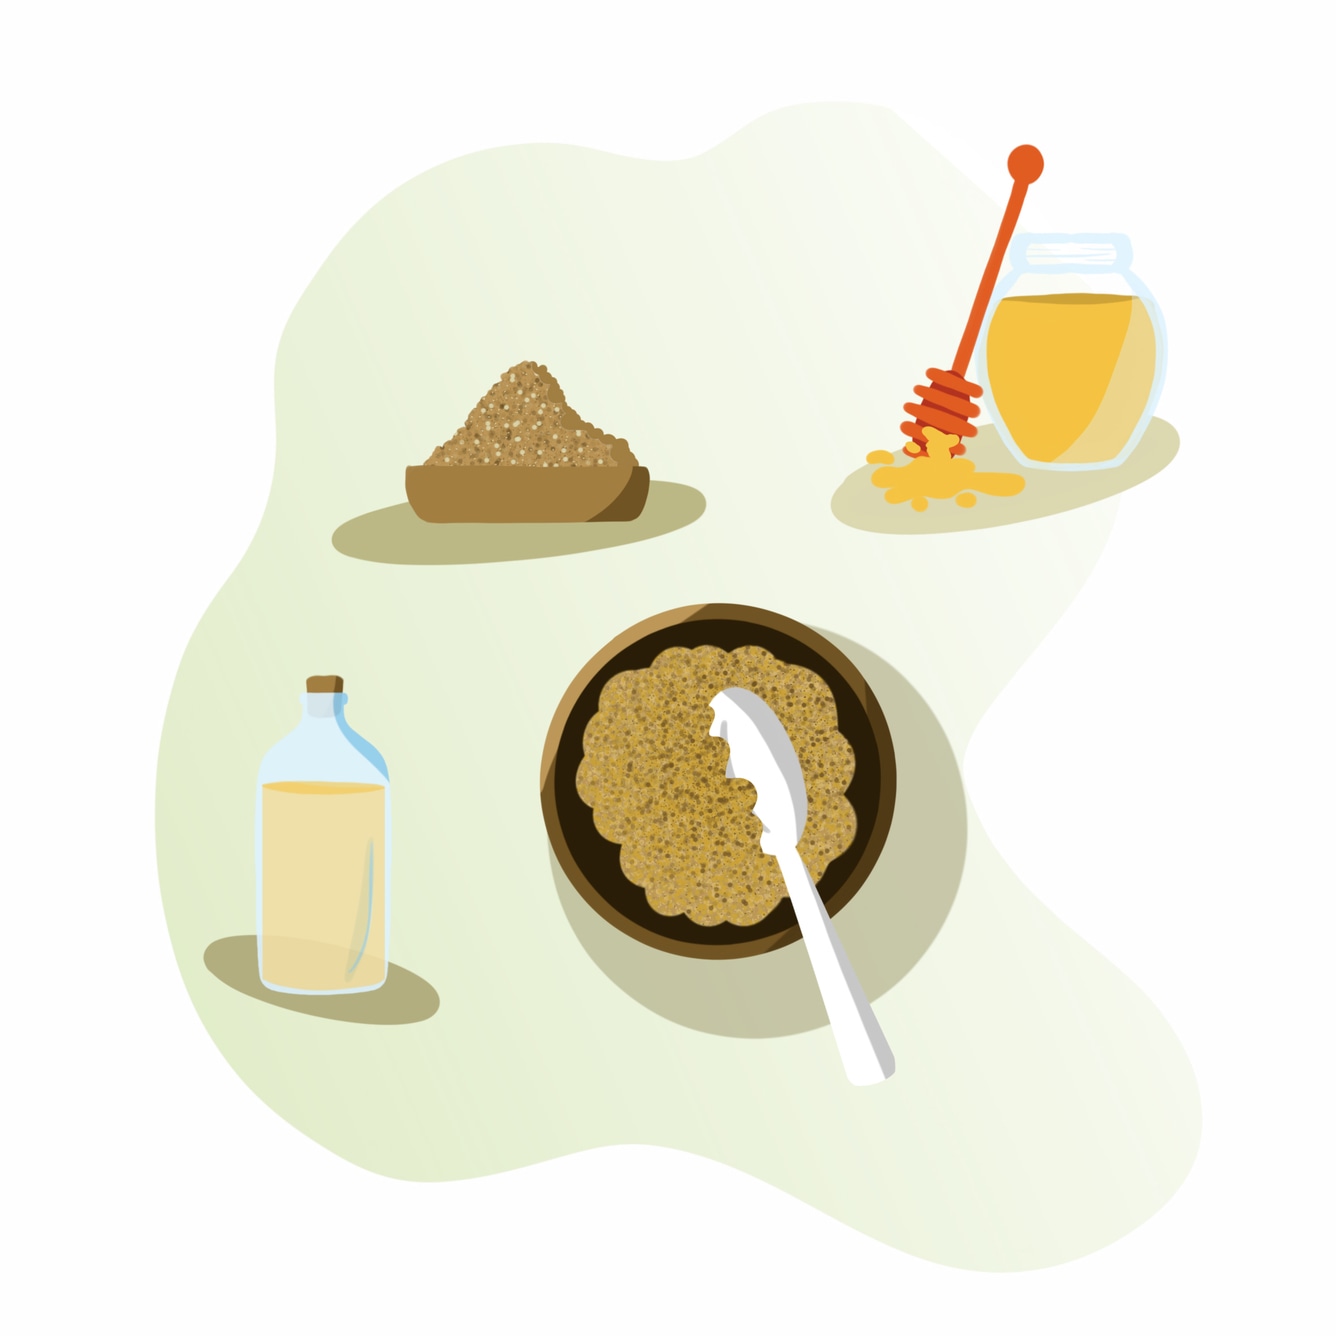 Illustration of ingredients for oats homemeade face scrub